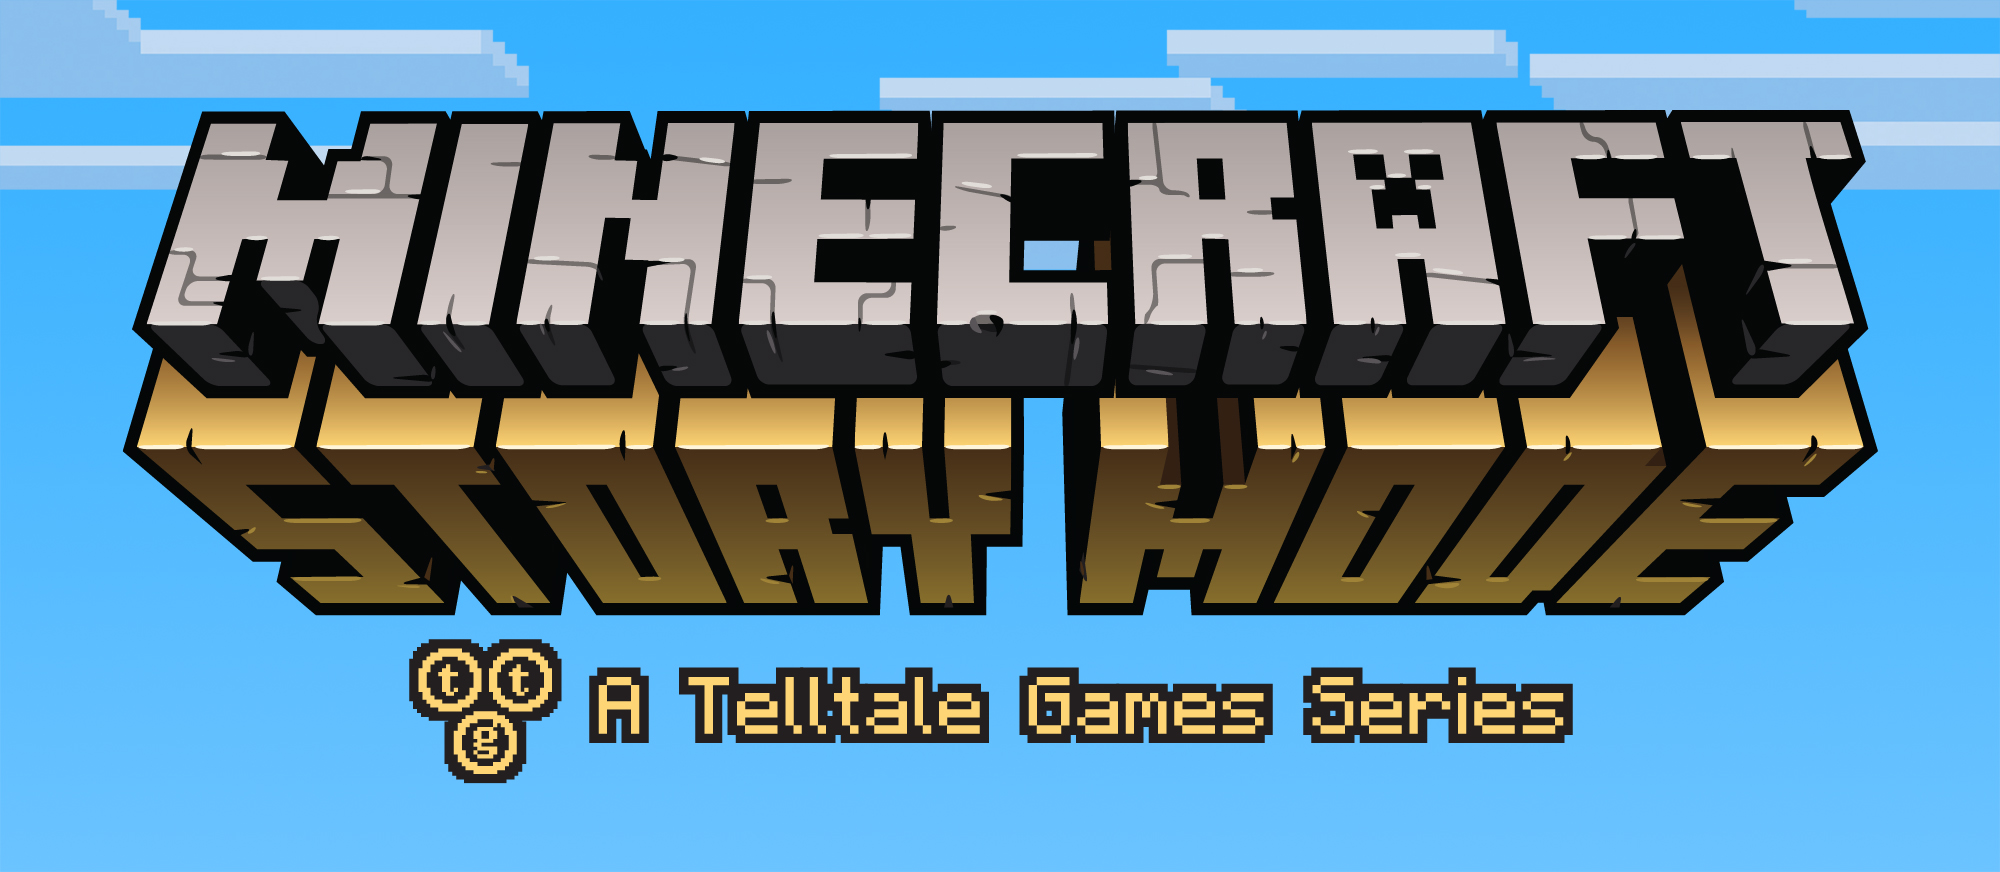 Minecraft: Story Mode – Episode 2: Assembly Required Review